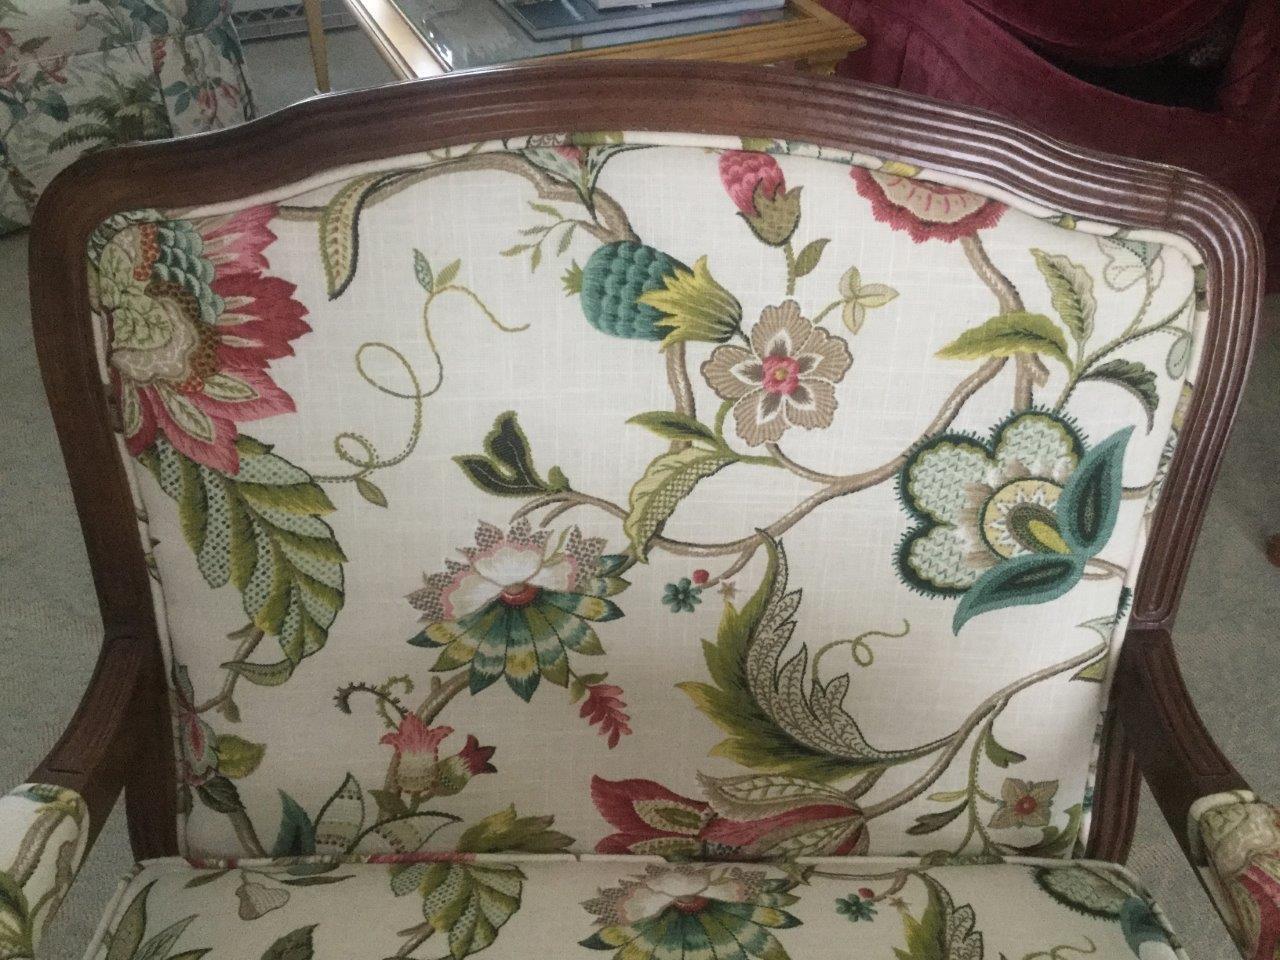 Louis XVI Elegant Comfy Pair of French Style Bergere Armchairs with Floral Upholstery